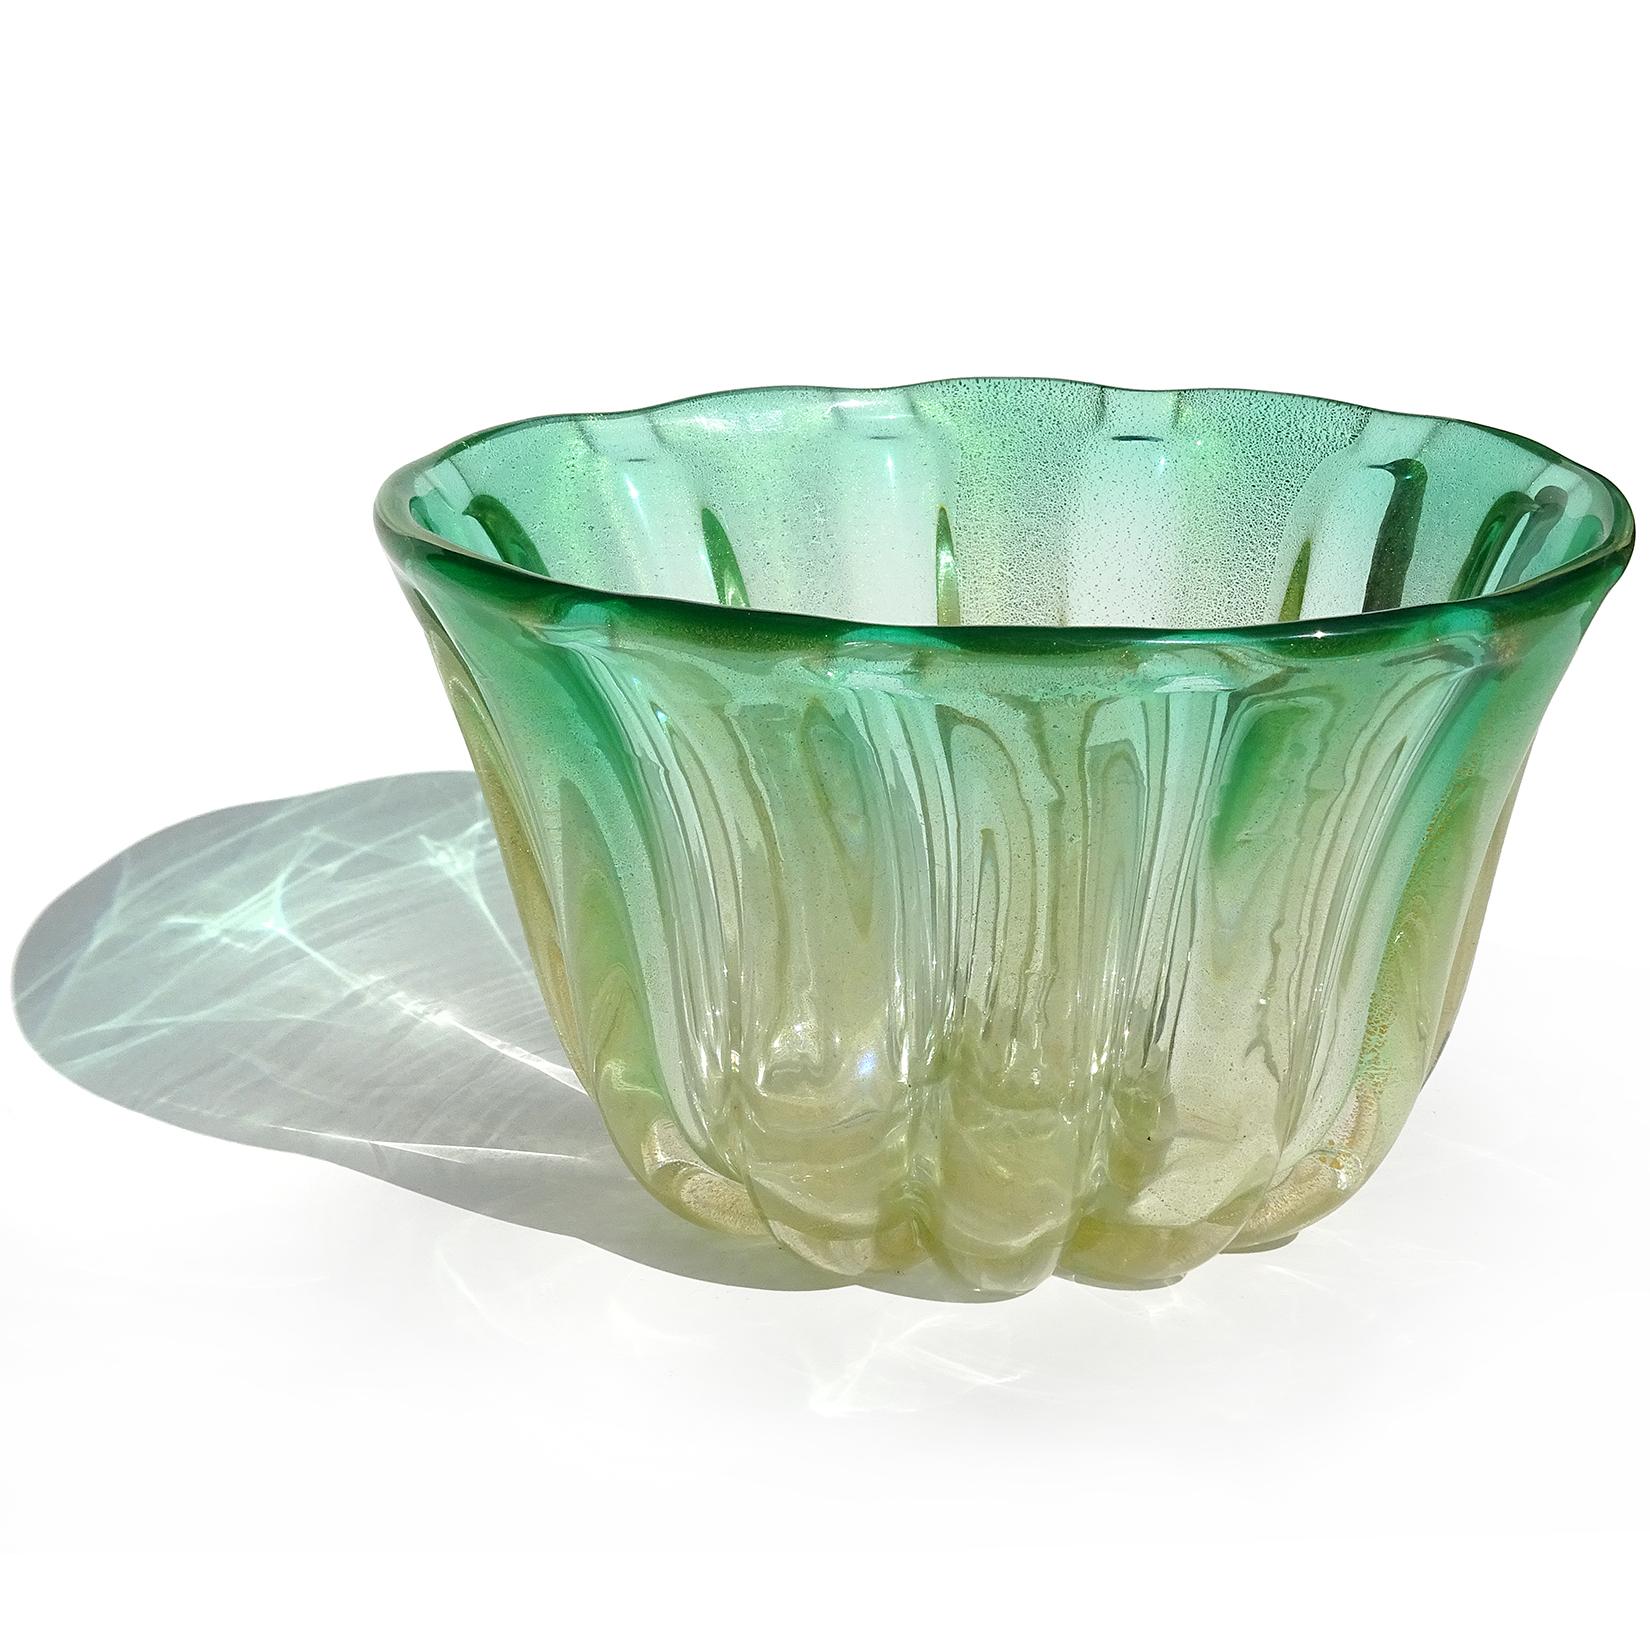 Priced per item (2 available). Beautiful vintage Murano hand blown Sommerso green and gold flecks Italian art glass bowl / vase. It has a green rim that fades to clear at the bottom. Profusely covered in gold leaf, with a ribbed surface. Tall enough